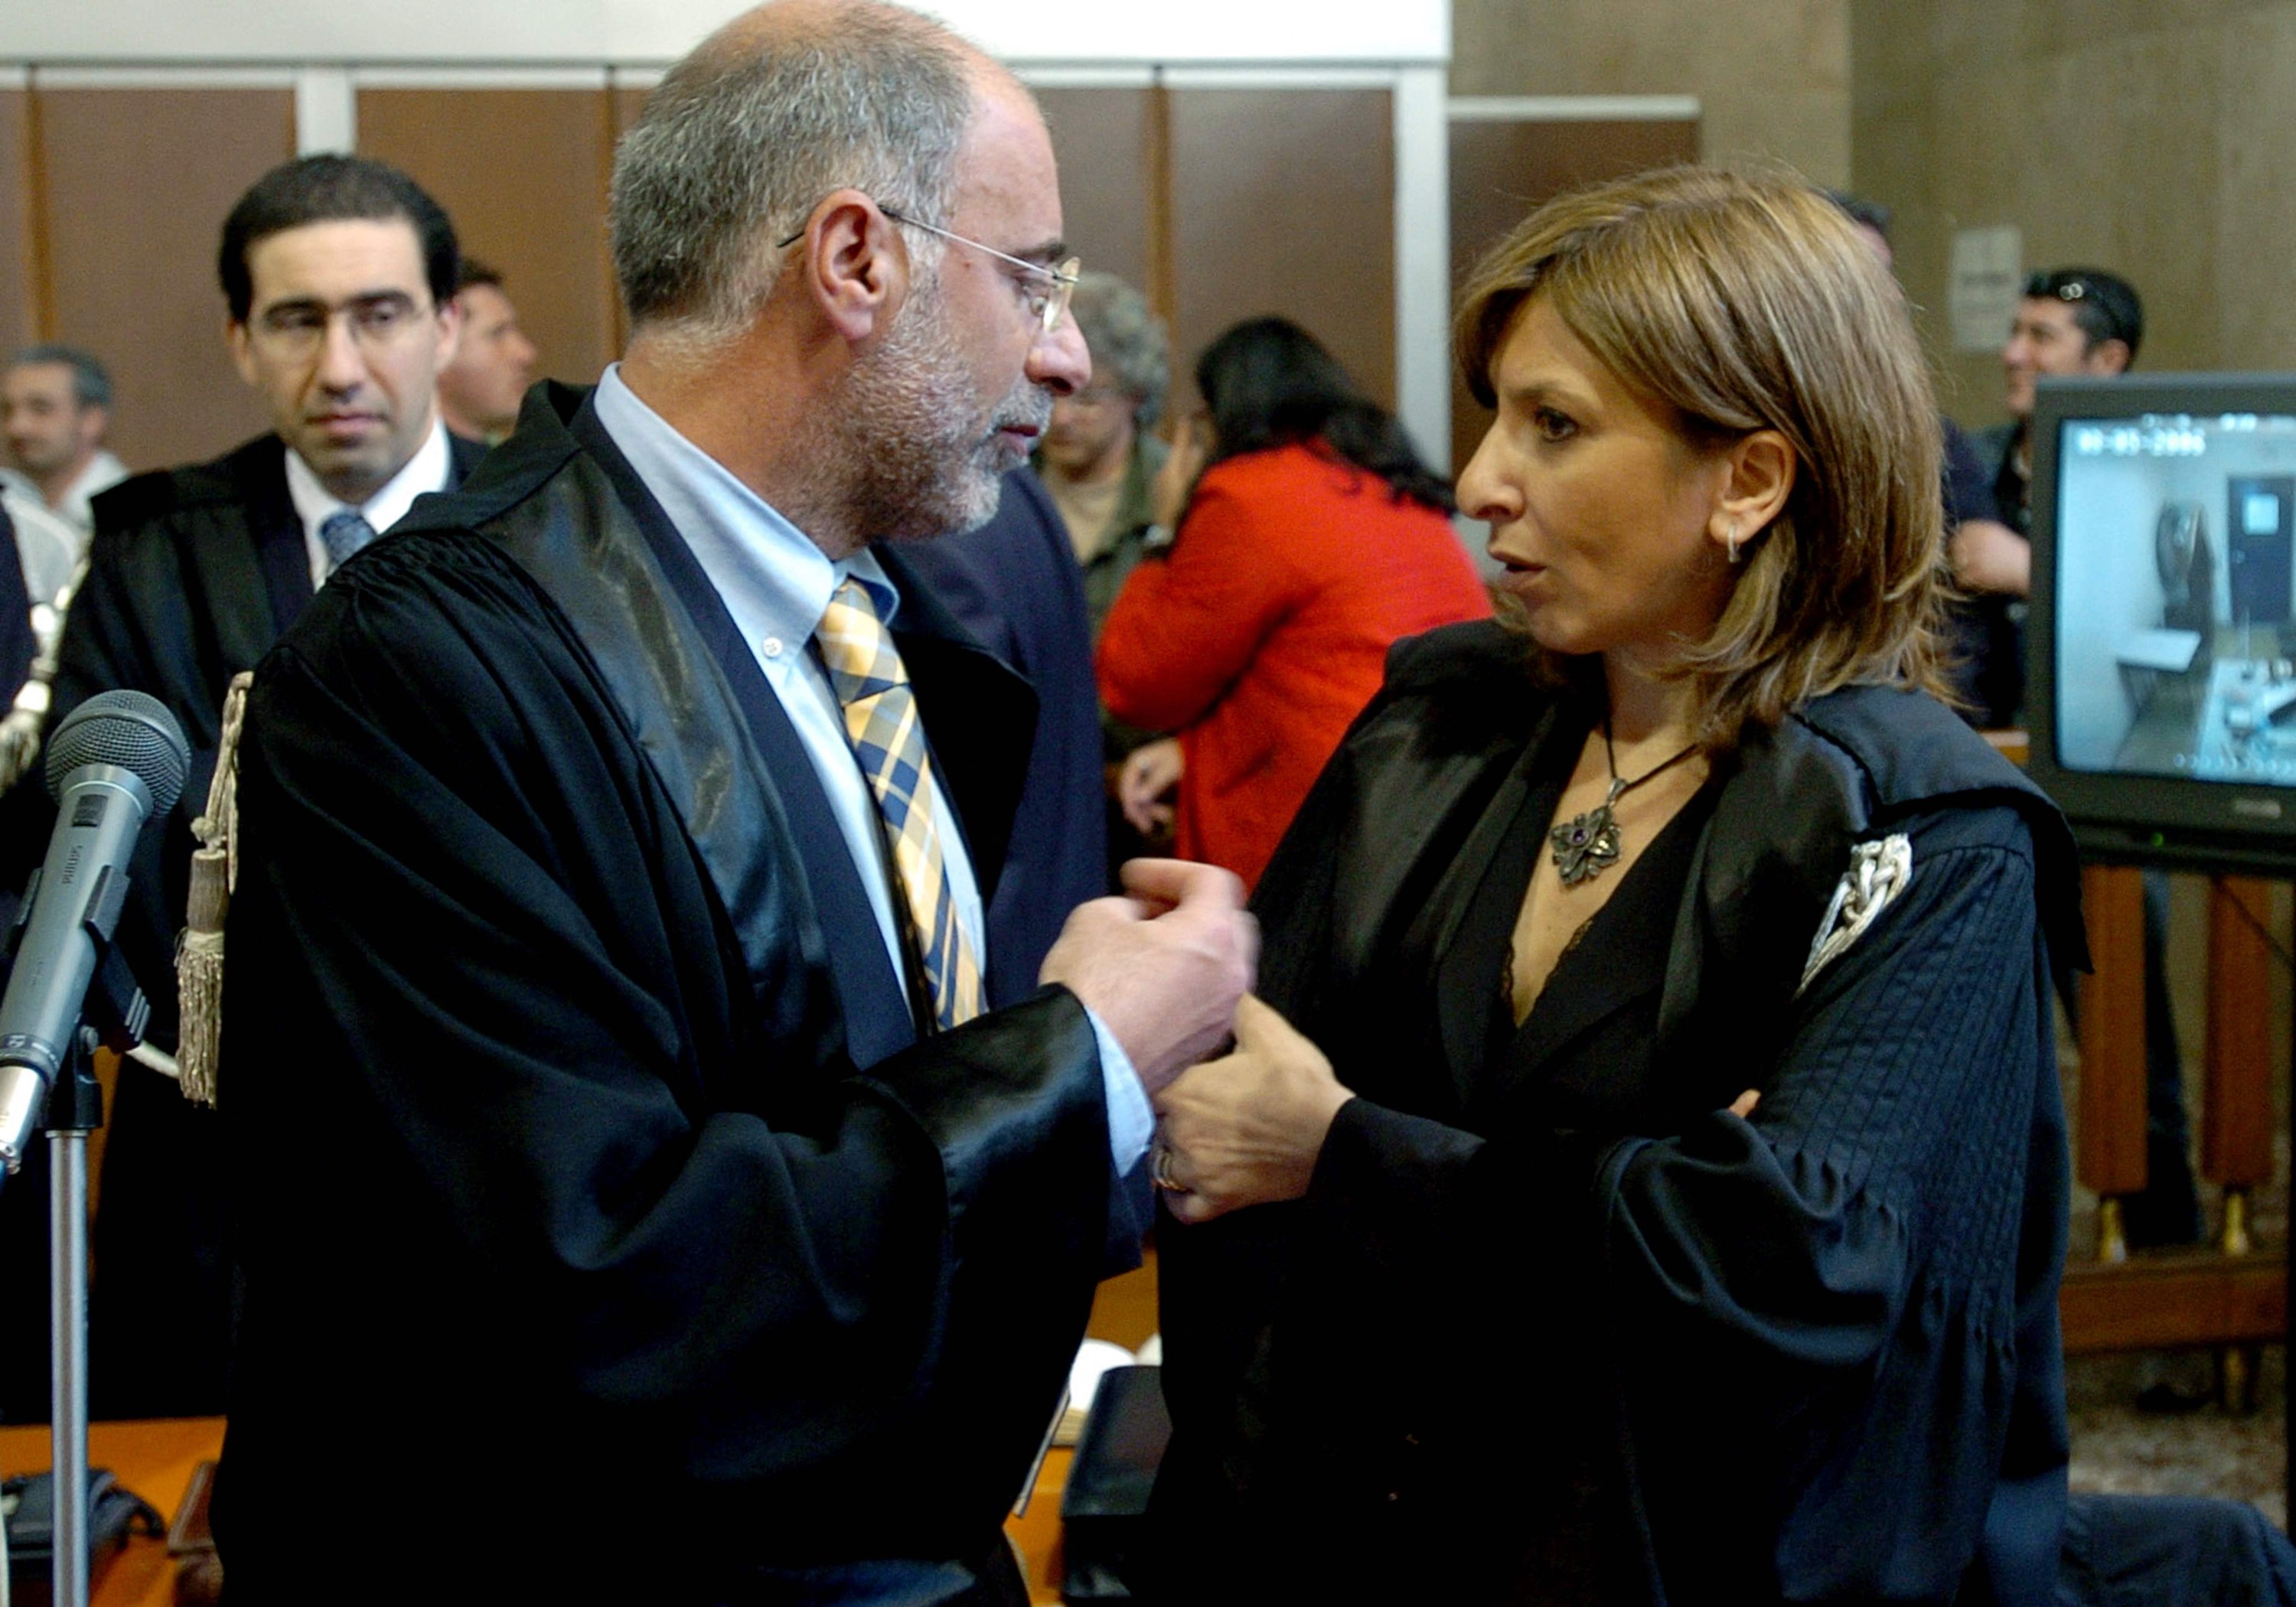 This undated and unlocated photo obtained on May 18, 2022 from Italian news agency ANSA shows Italian magistrate, Marzia Eugenia Sabella (R), who, since 2017, is deputy prosecutor of the republic at the court of Palermo, Sicily, Italy. (Photo by Stringer/ANSA/AFP)